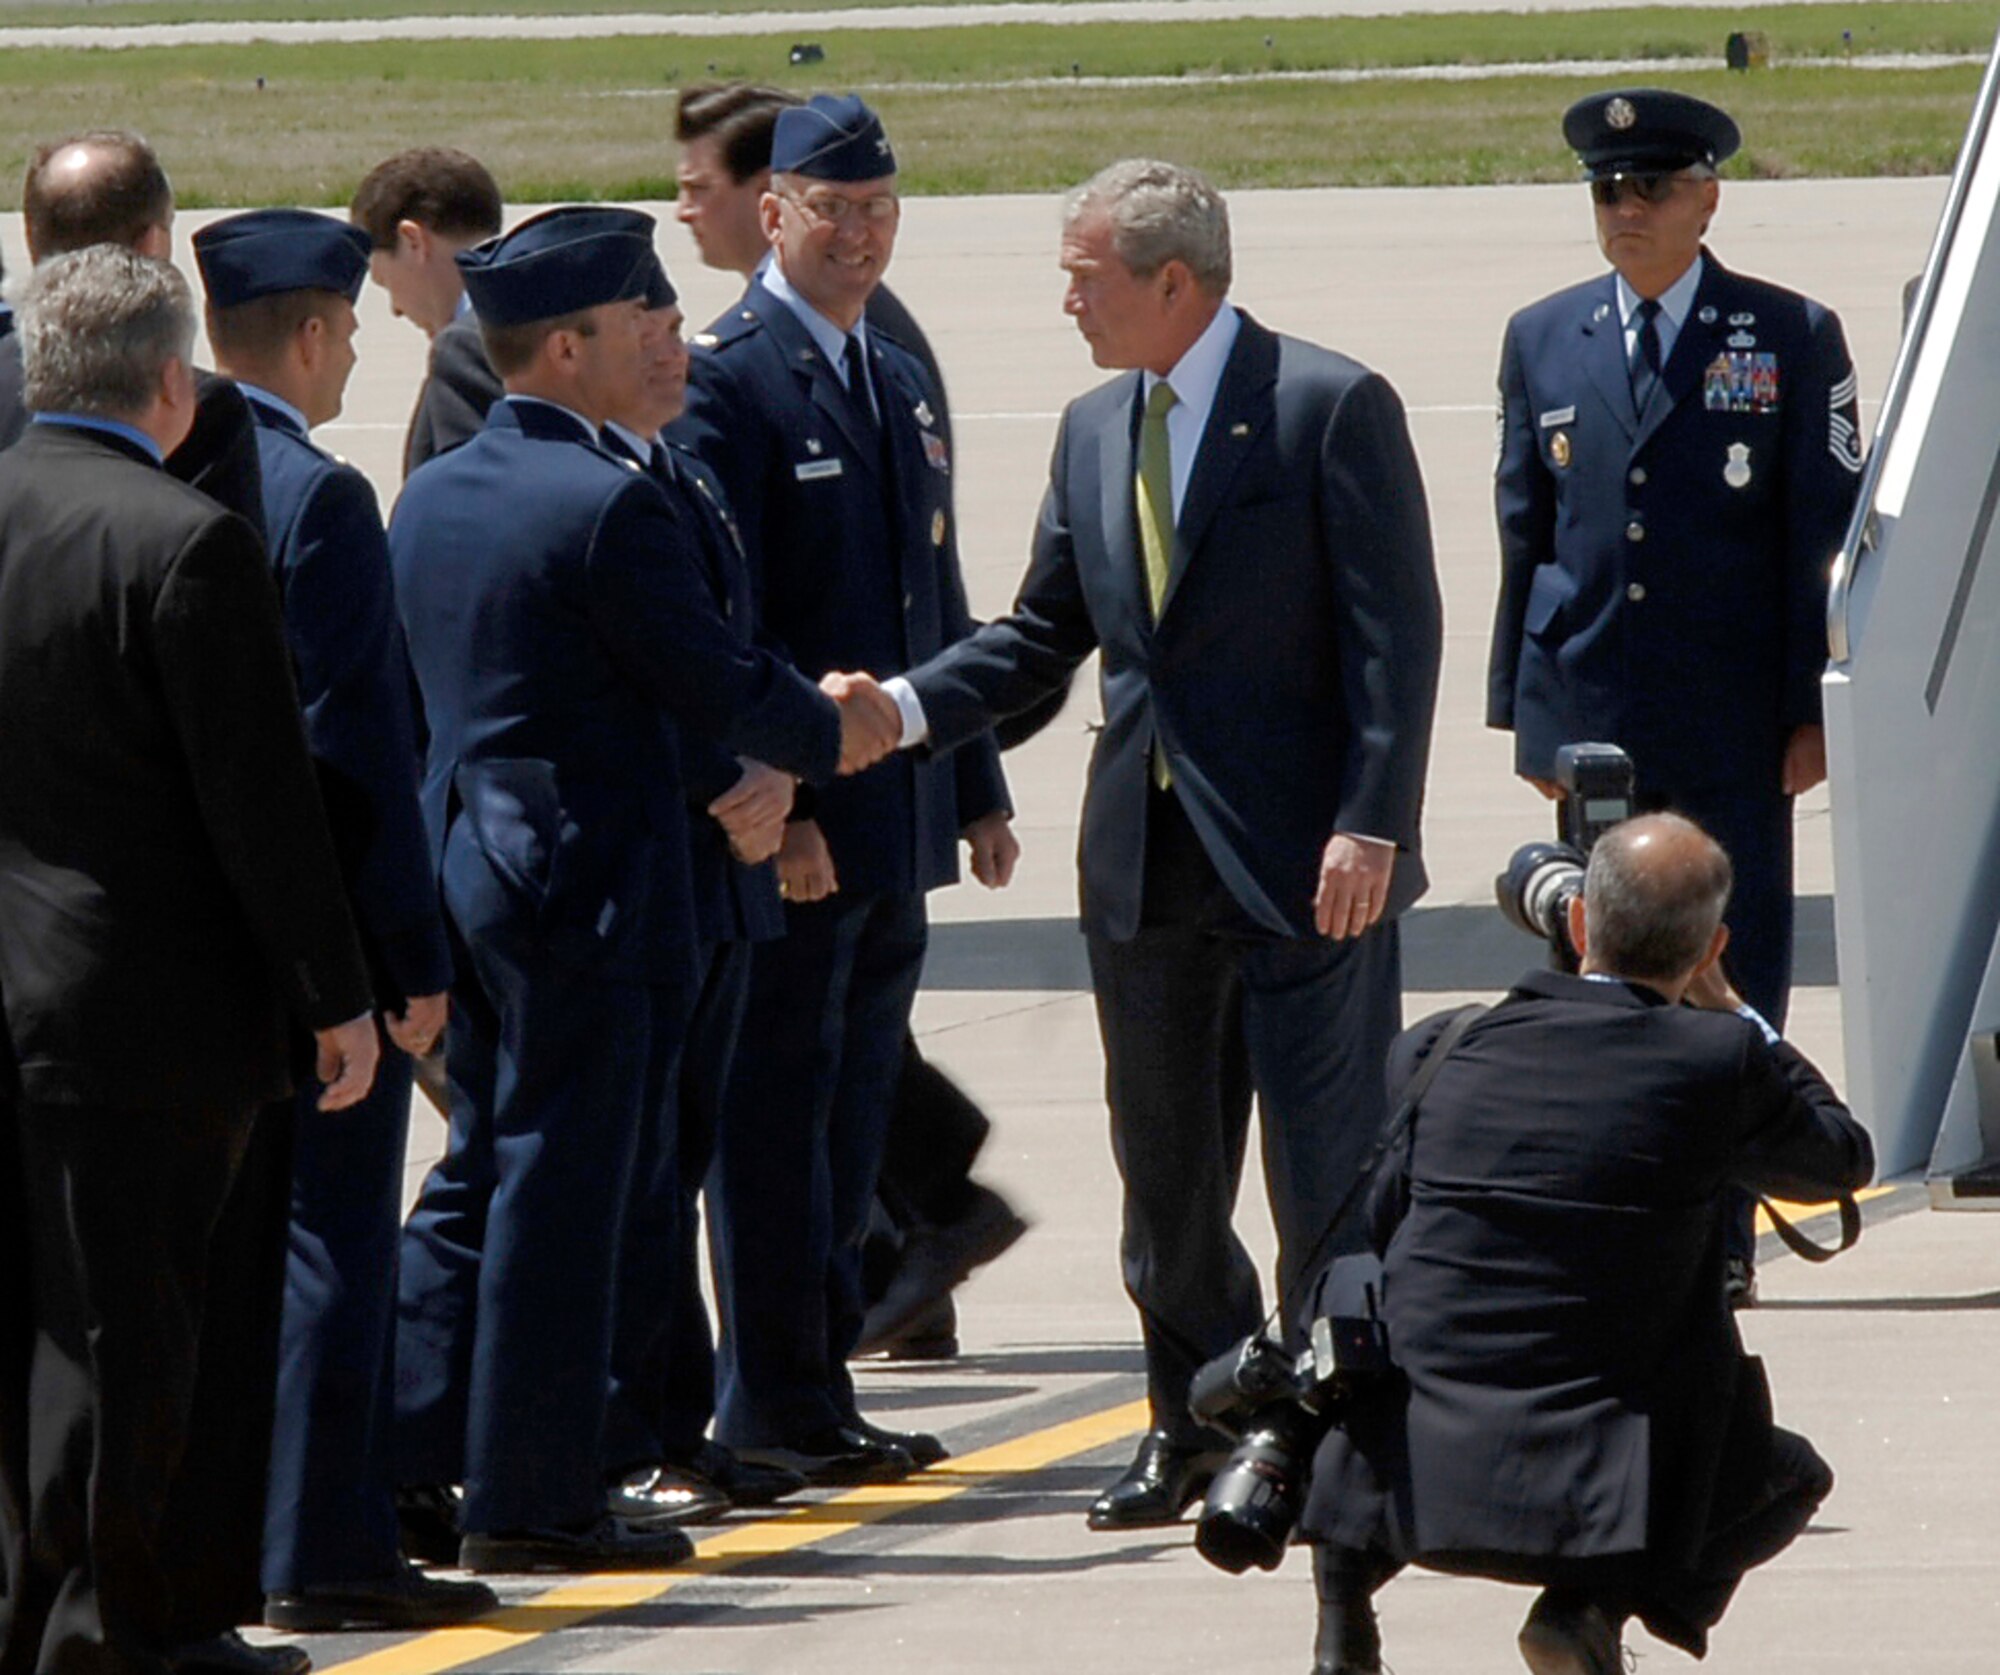 Col. William Cahoon, 931st Air Refueling Group Commander, greets President George Bush at McConnell Air Force Base, Kan., on May 4.  The president was in Kansas to visit Greensburg, Kan., a town west of McConnell AFB that was destroyed by a tornado a year prior. Airmen from throughout the 931st also greeted the president, who took time to shake many of their hands.